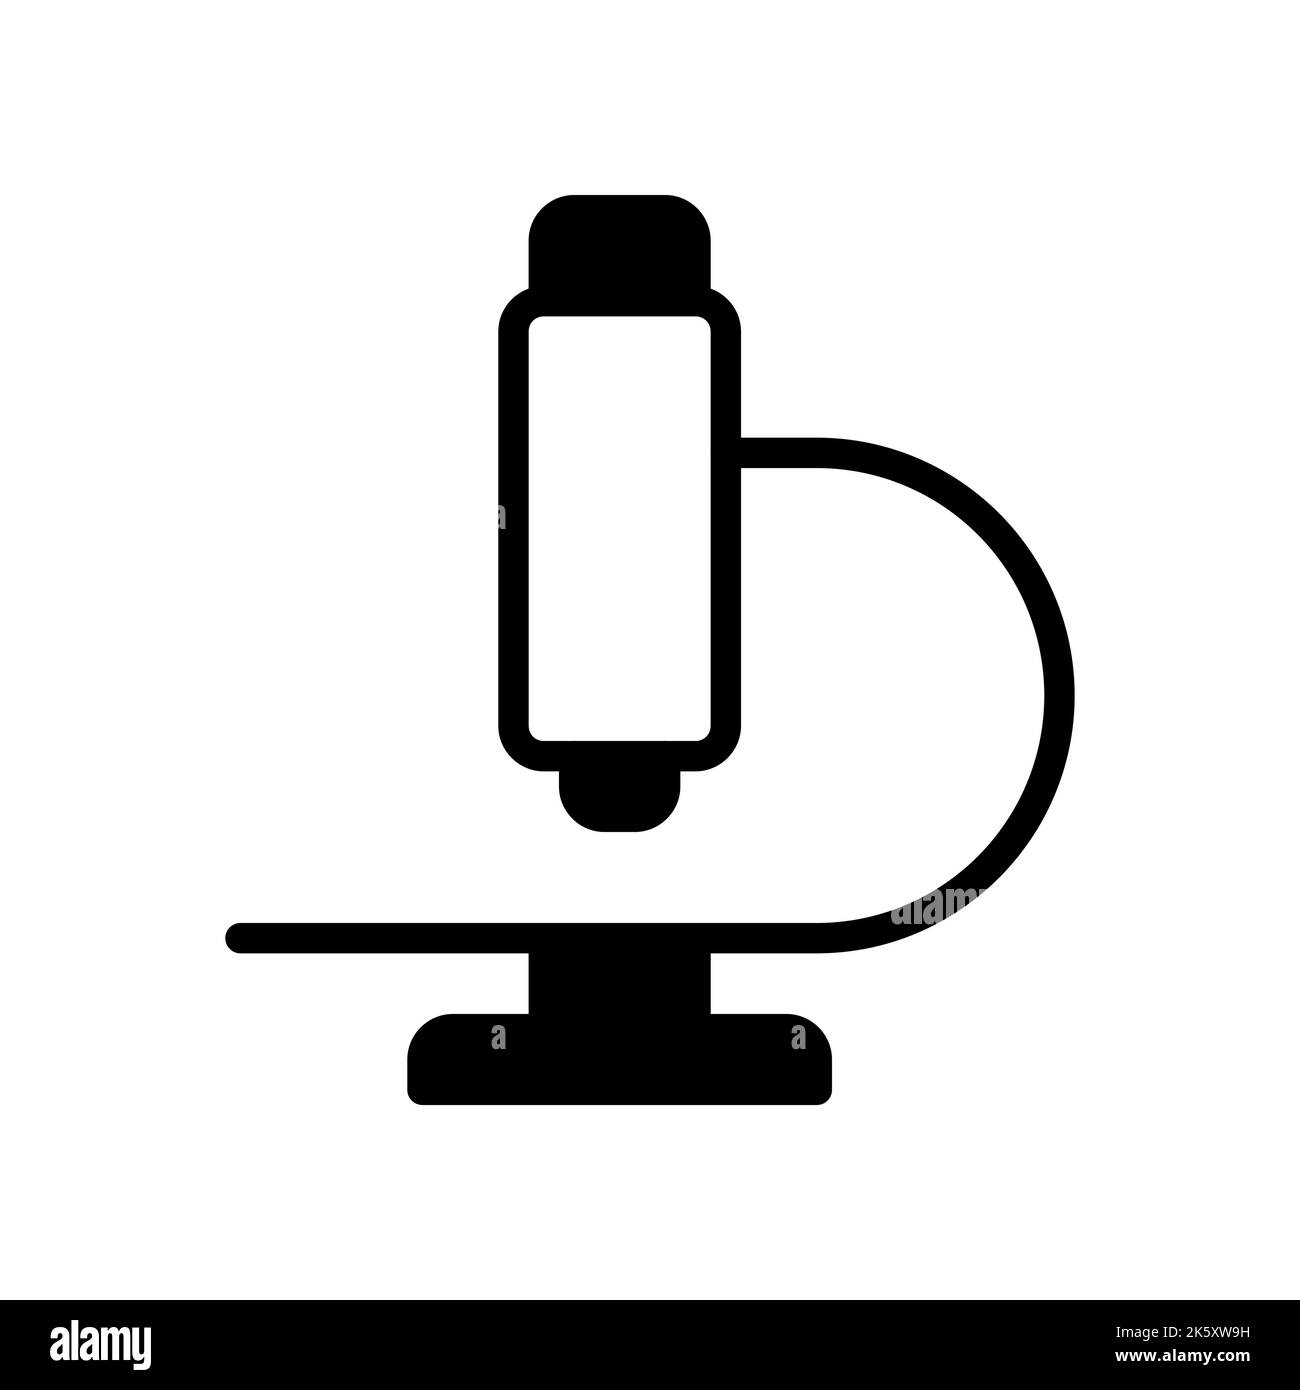 Microscope icon. an instrument for viewing small microbes. Stock Vector